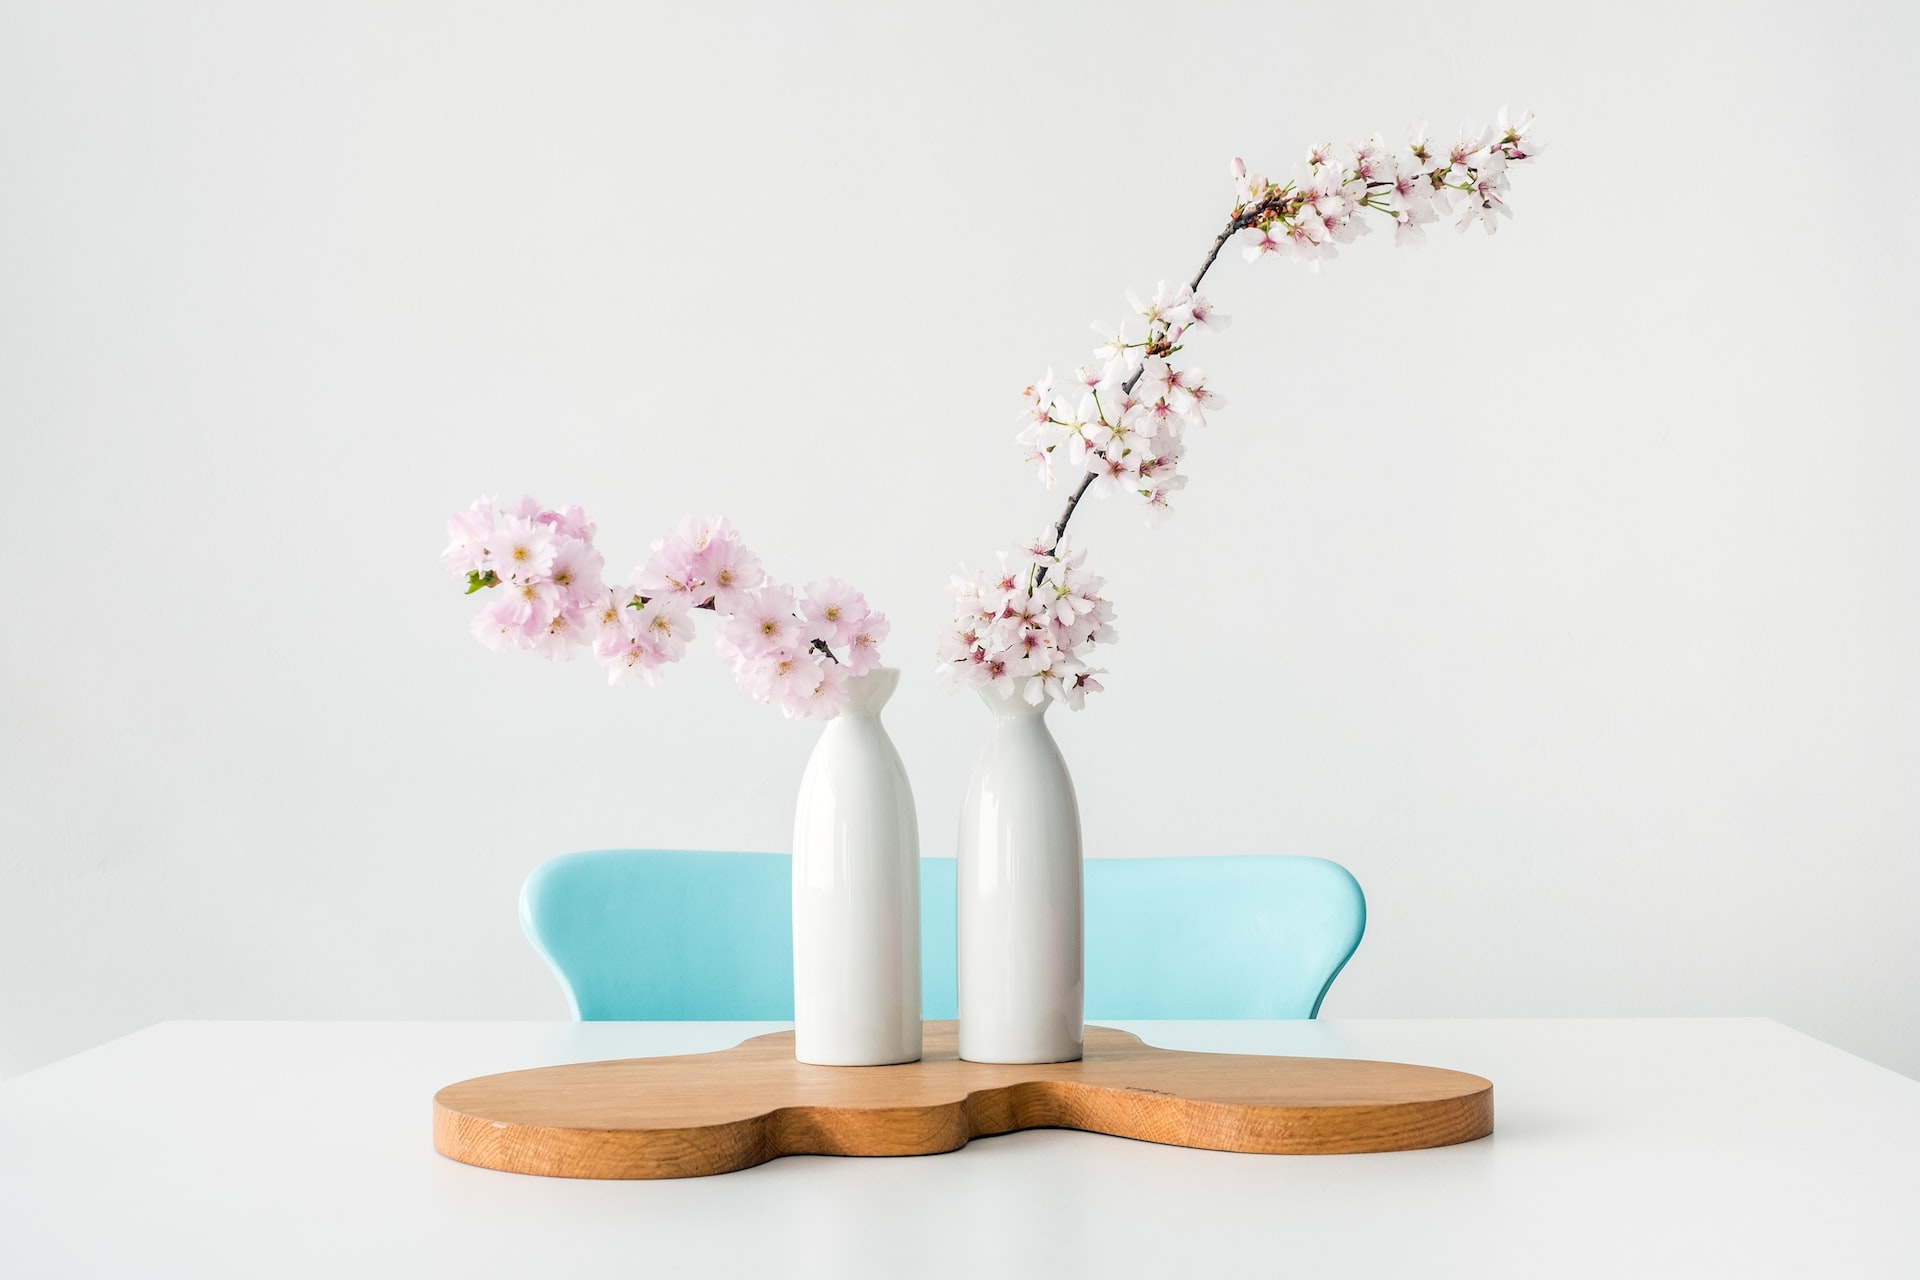 Cherry Blossom-Inspired Home Decor Ideas for Pune: Bring the Beauty of Spring Inside